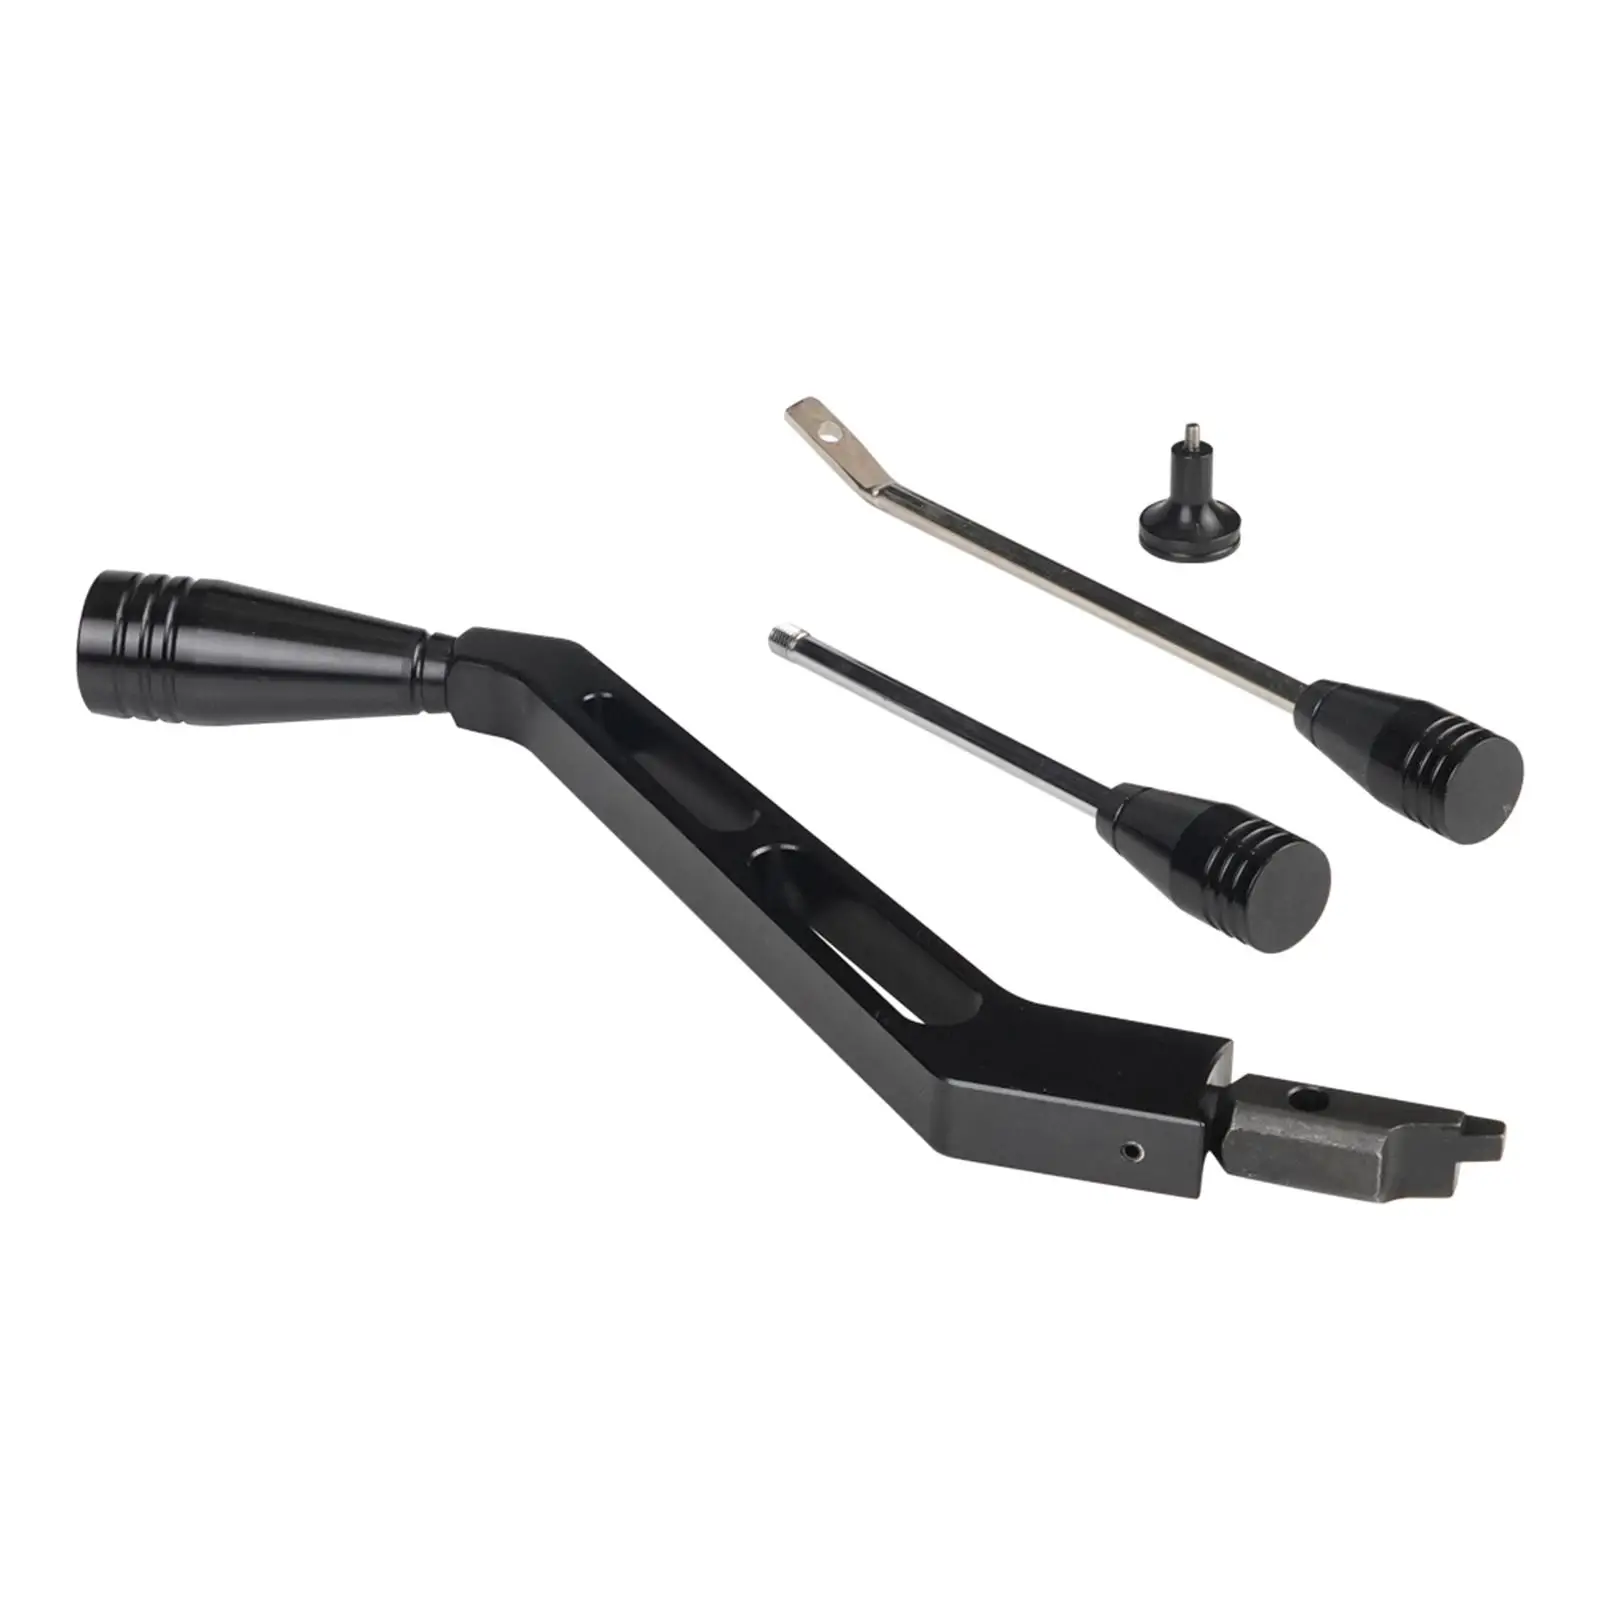 Shifter Turn Signal Lever Hazard Tilt Kit Easily Install Fittings Durable Automobile Direct Replaces for Columns 1967-1994